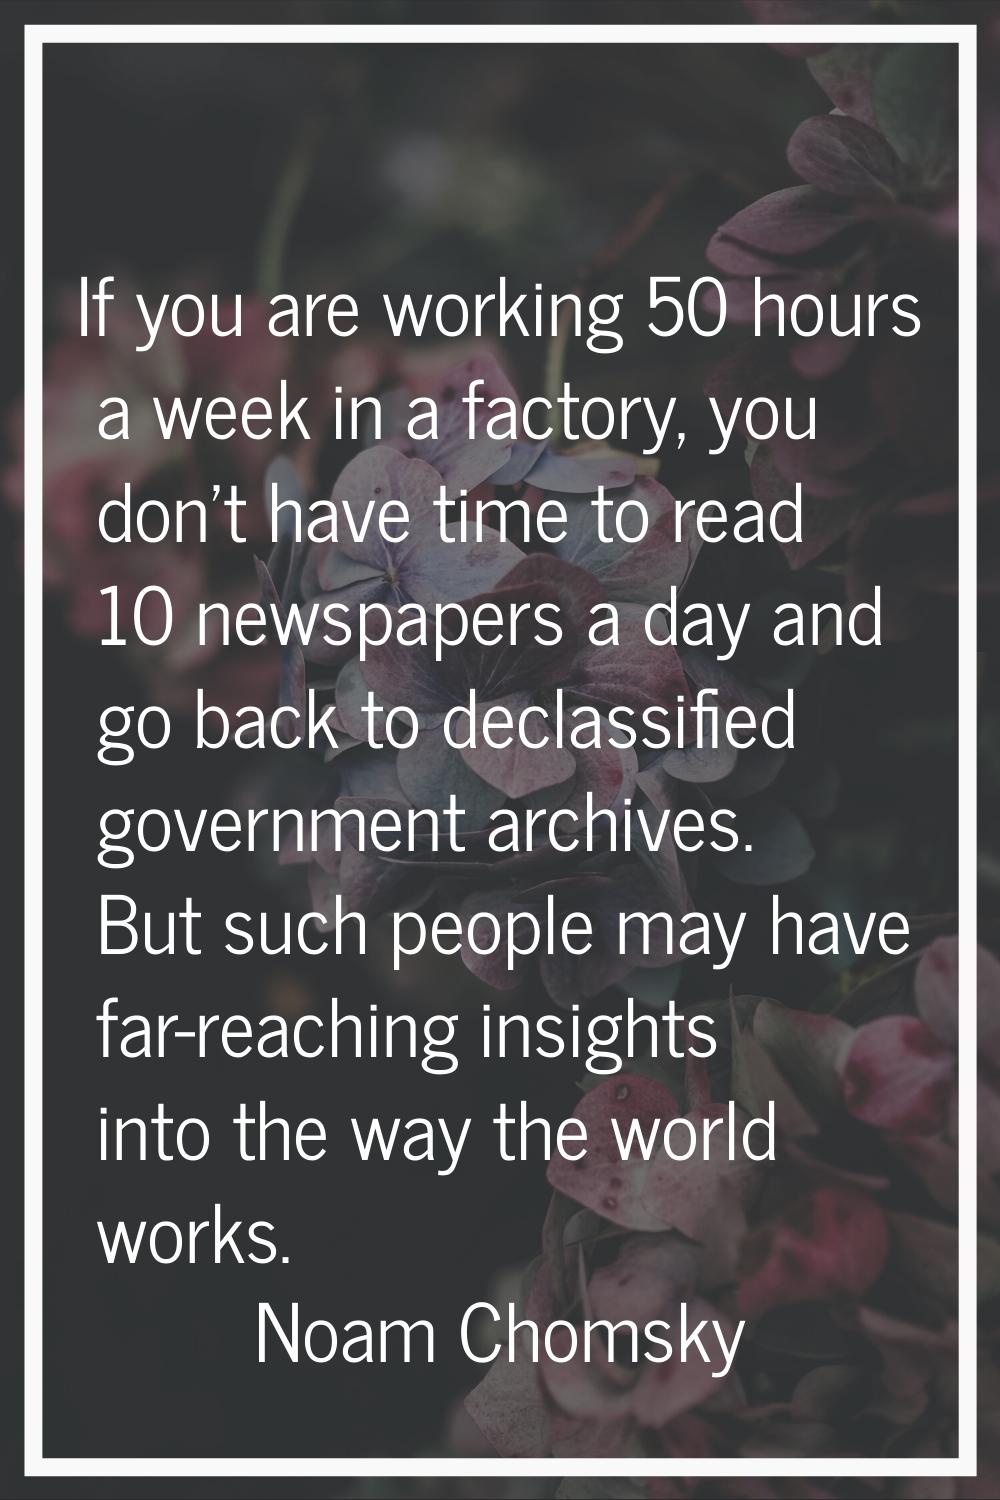 If you are working 50 hours a week in a factory, you don't have time to read 10 newspapers a day an